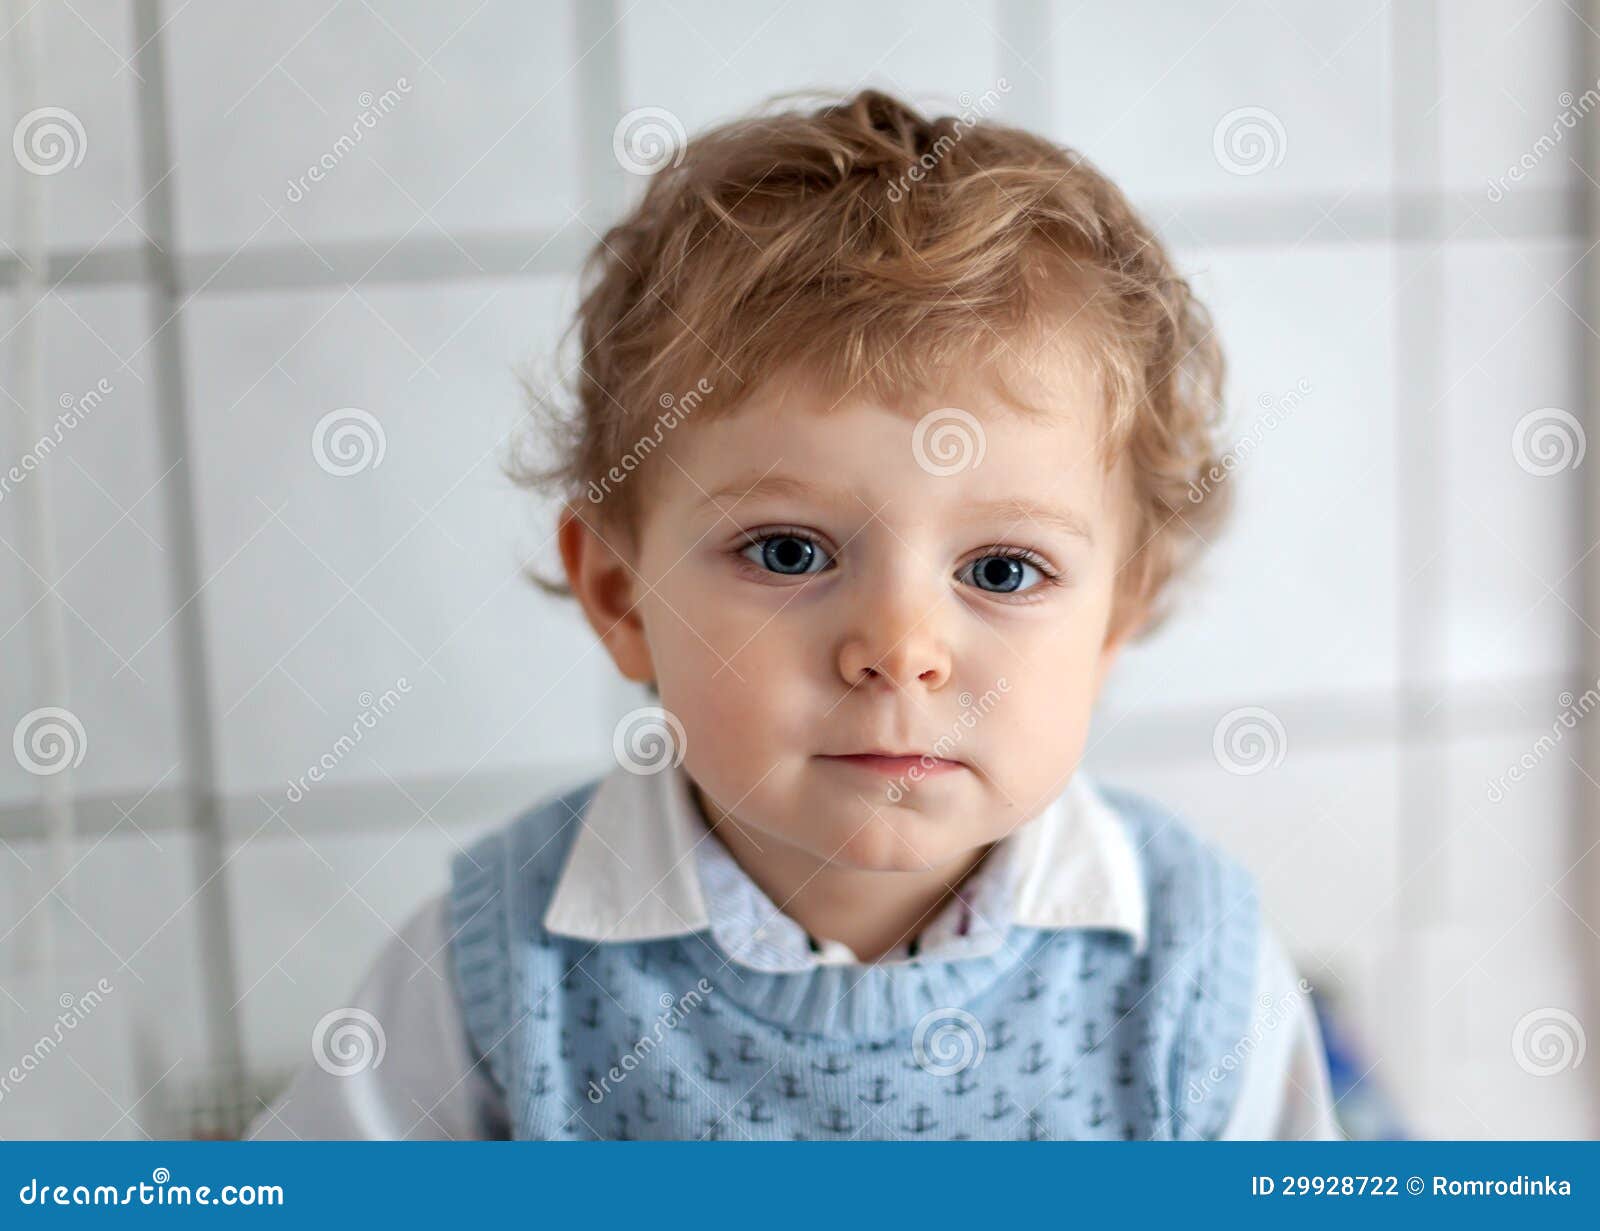 Adorable Toddler With Blue Eyes Indoor Stock Photo Image Of